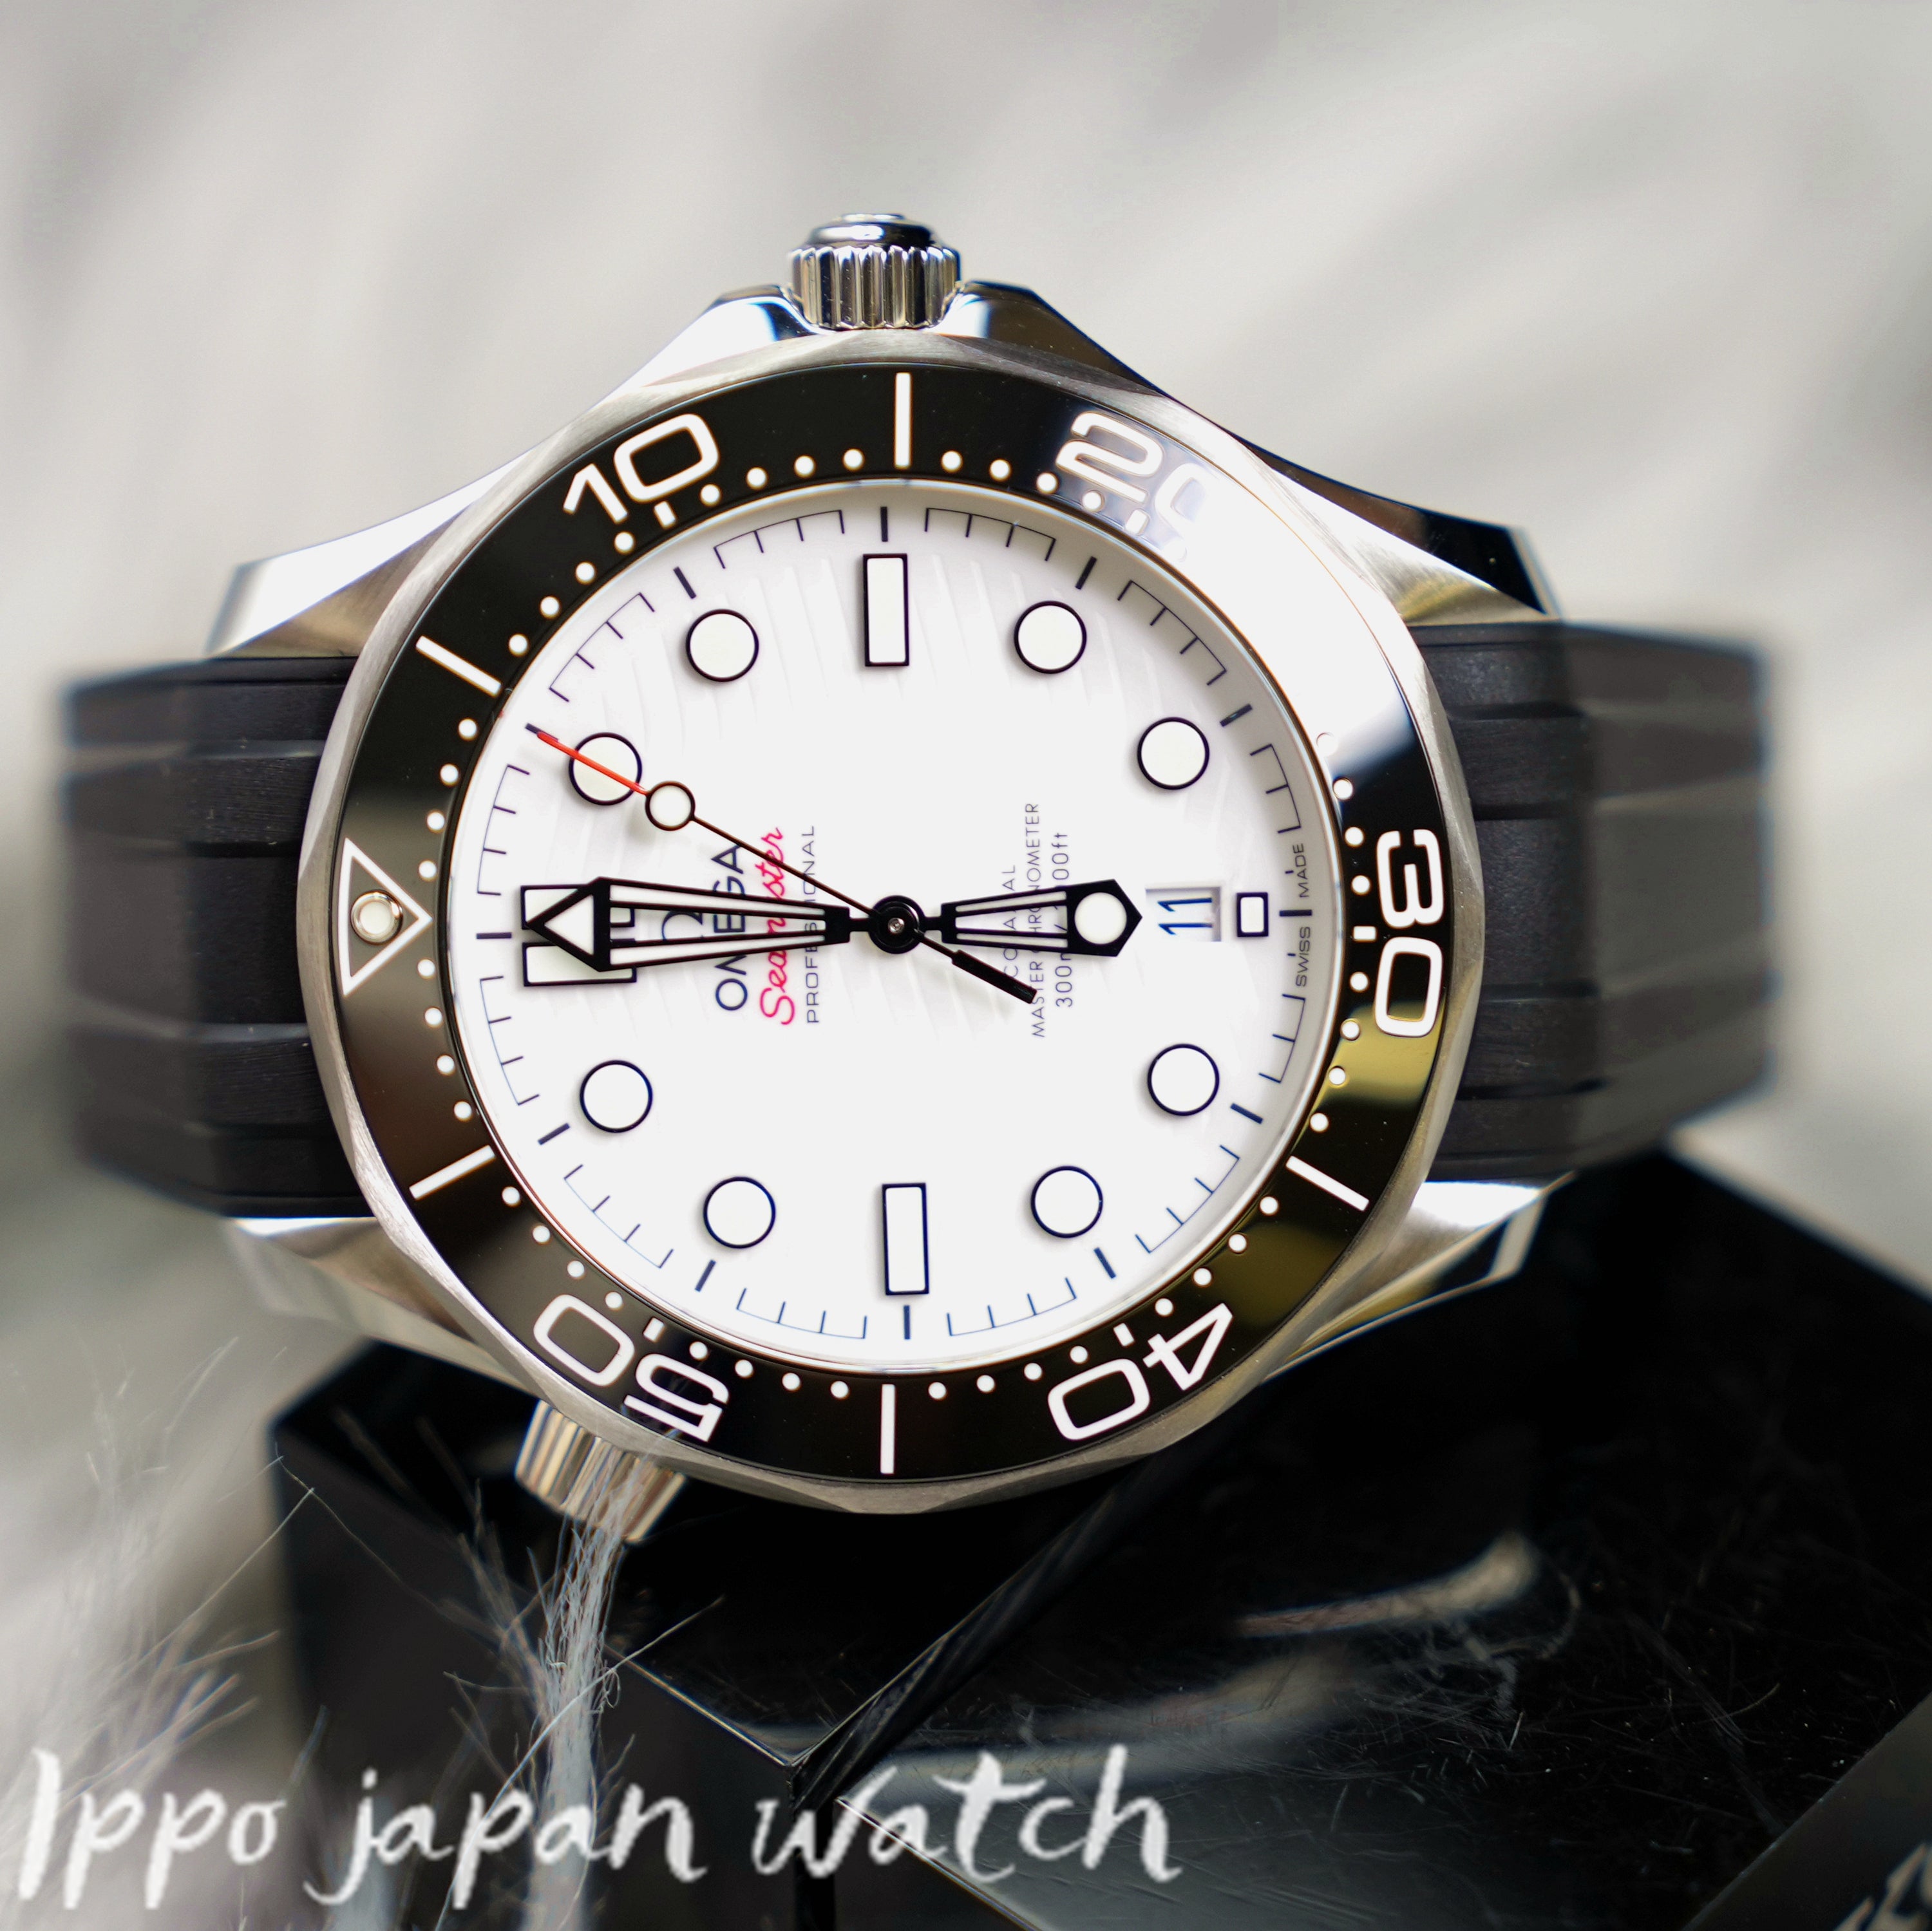 Omega DIVER 30 0M CO-AXIAL MASTER CHRONOMETER 42 M﻿M 210.32.42.20.04.001 watch - IPPO JAPAN WATCH 